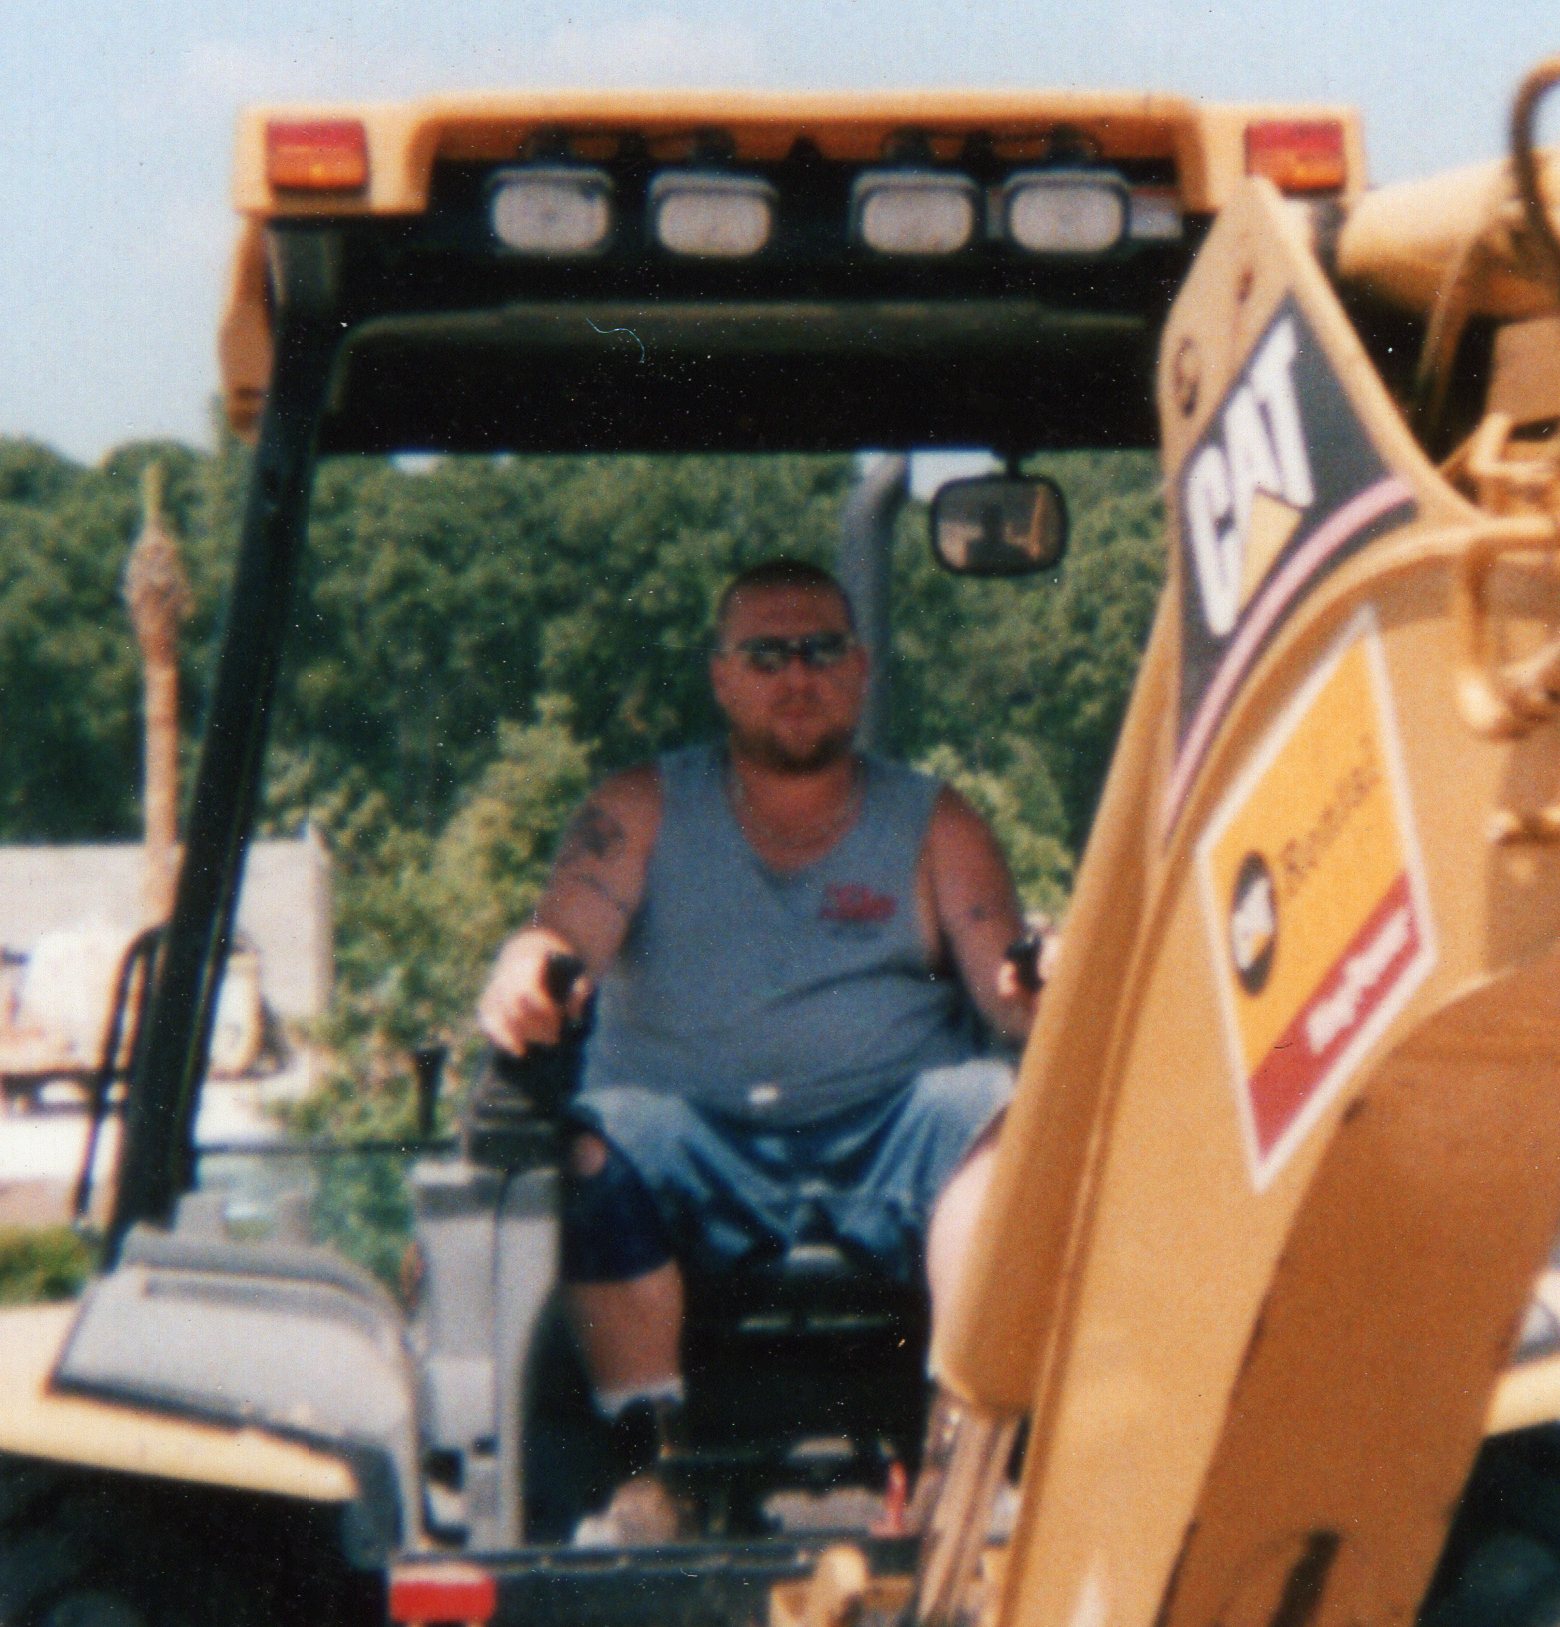 Kevin in a digger